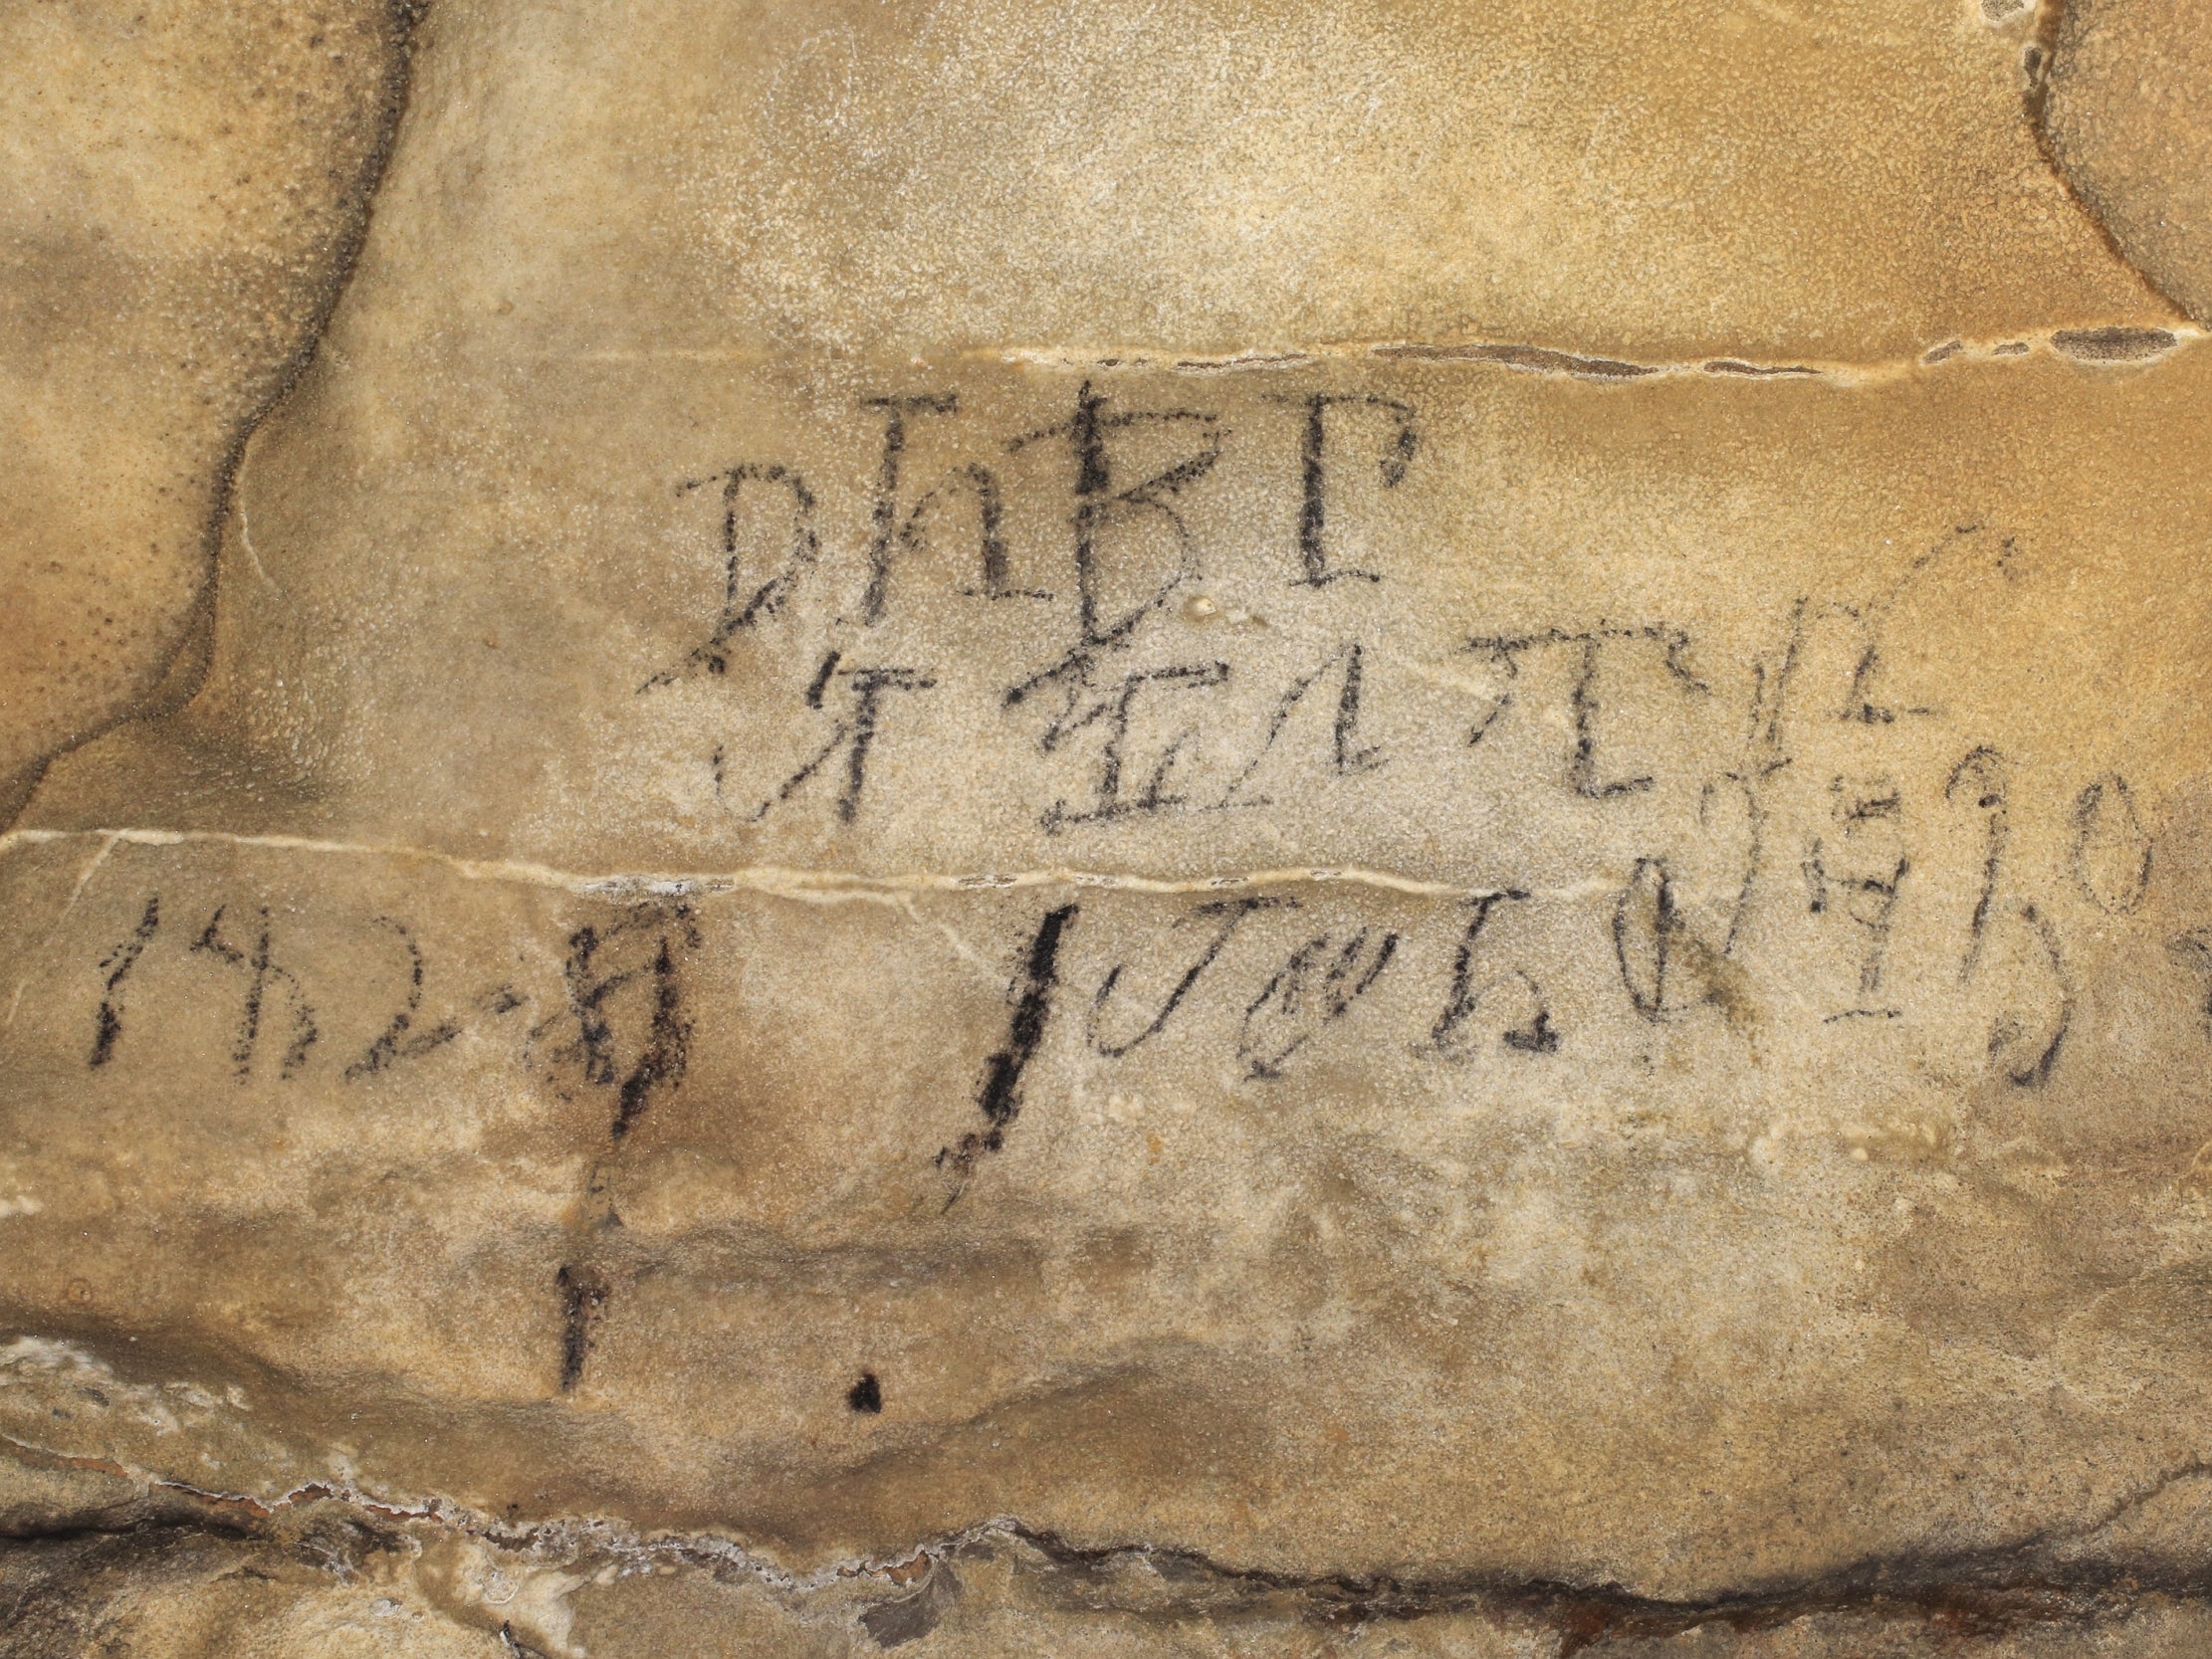 Figure3. Cherokee syllabary inscription from 1.5km into Manitou Cave